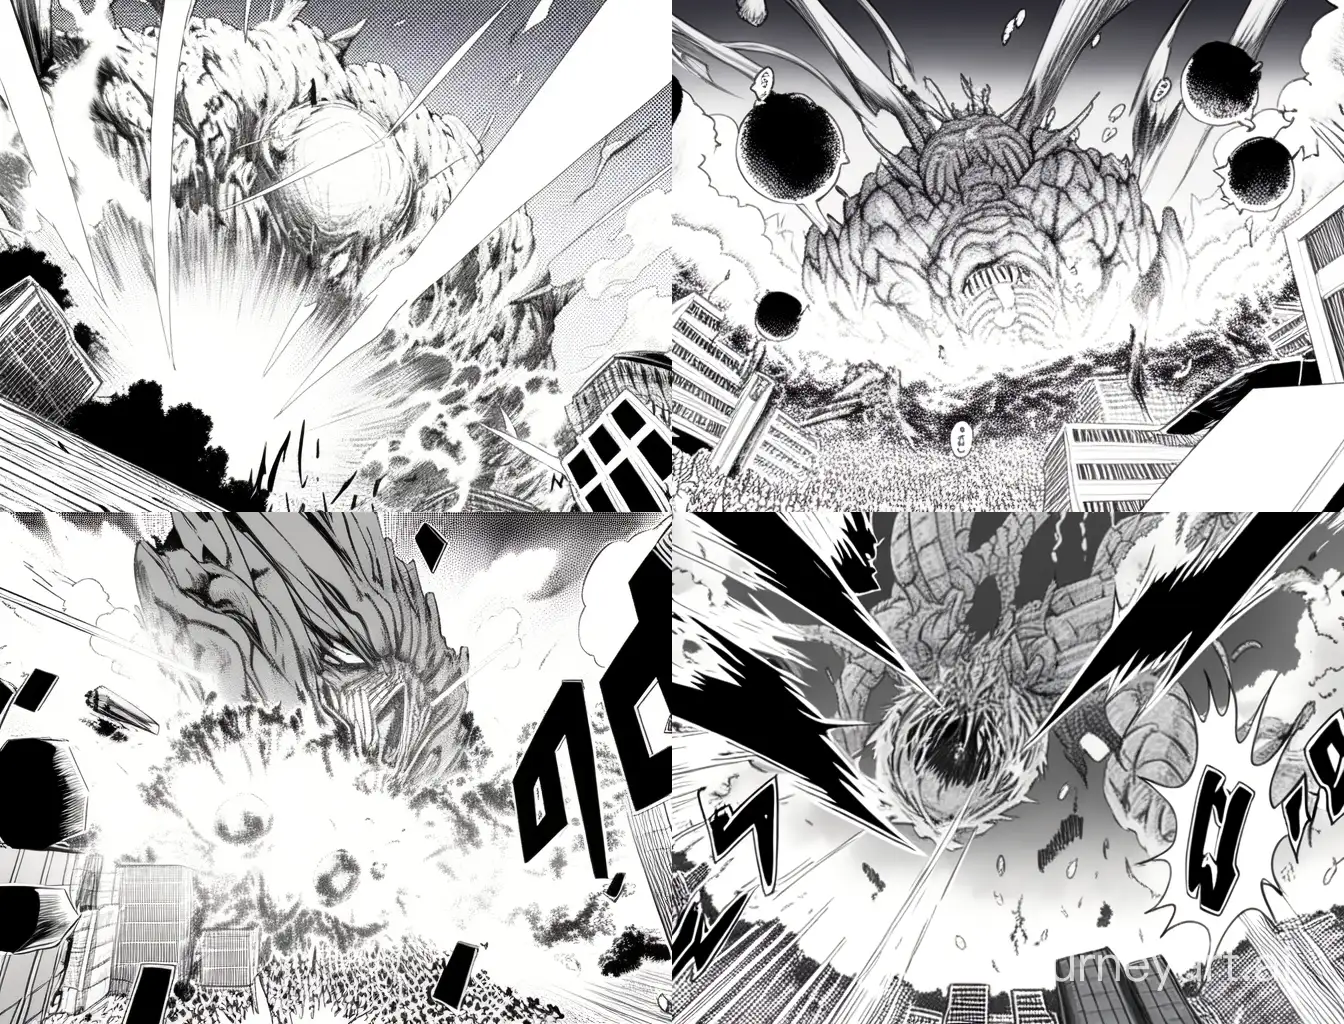 Manga panel, best quality, a giant hellmouth directly above in the sky, violently sucking buildings and people towards it 